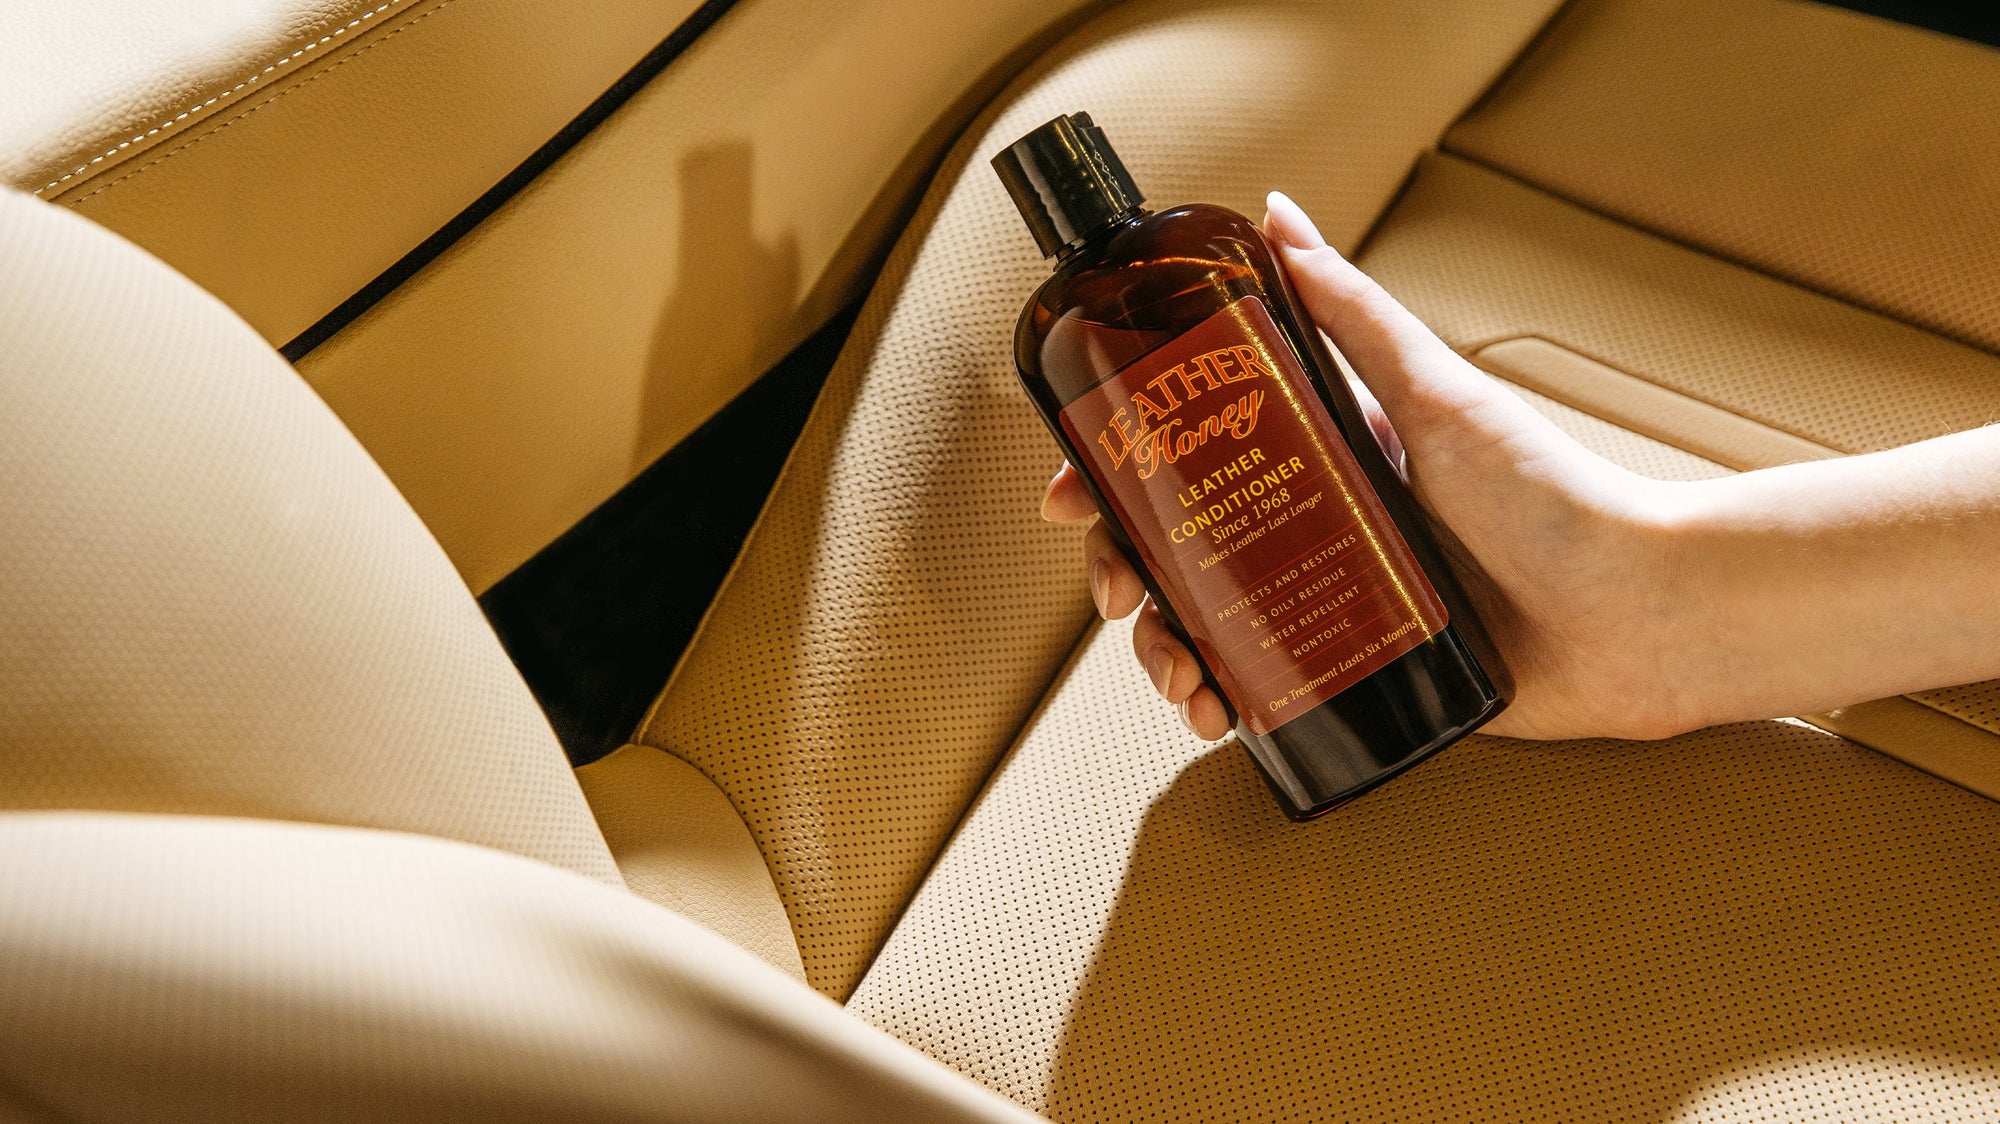 Leather Honey leather care products condition leather car seat.